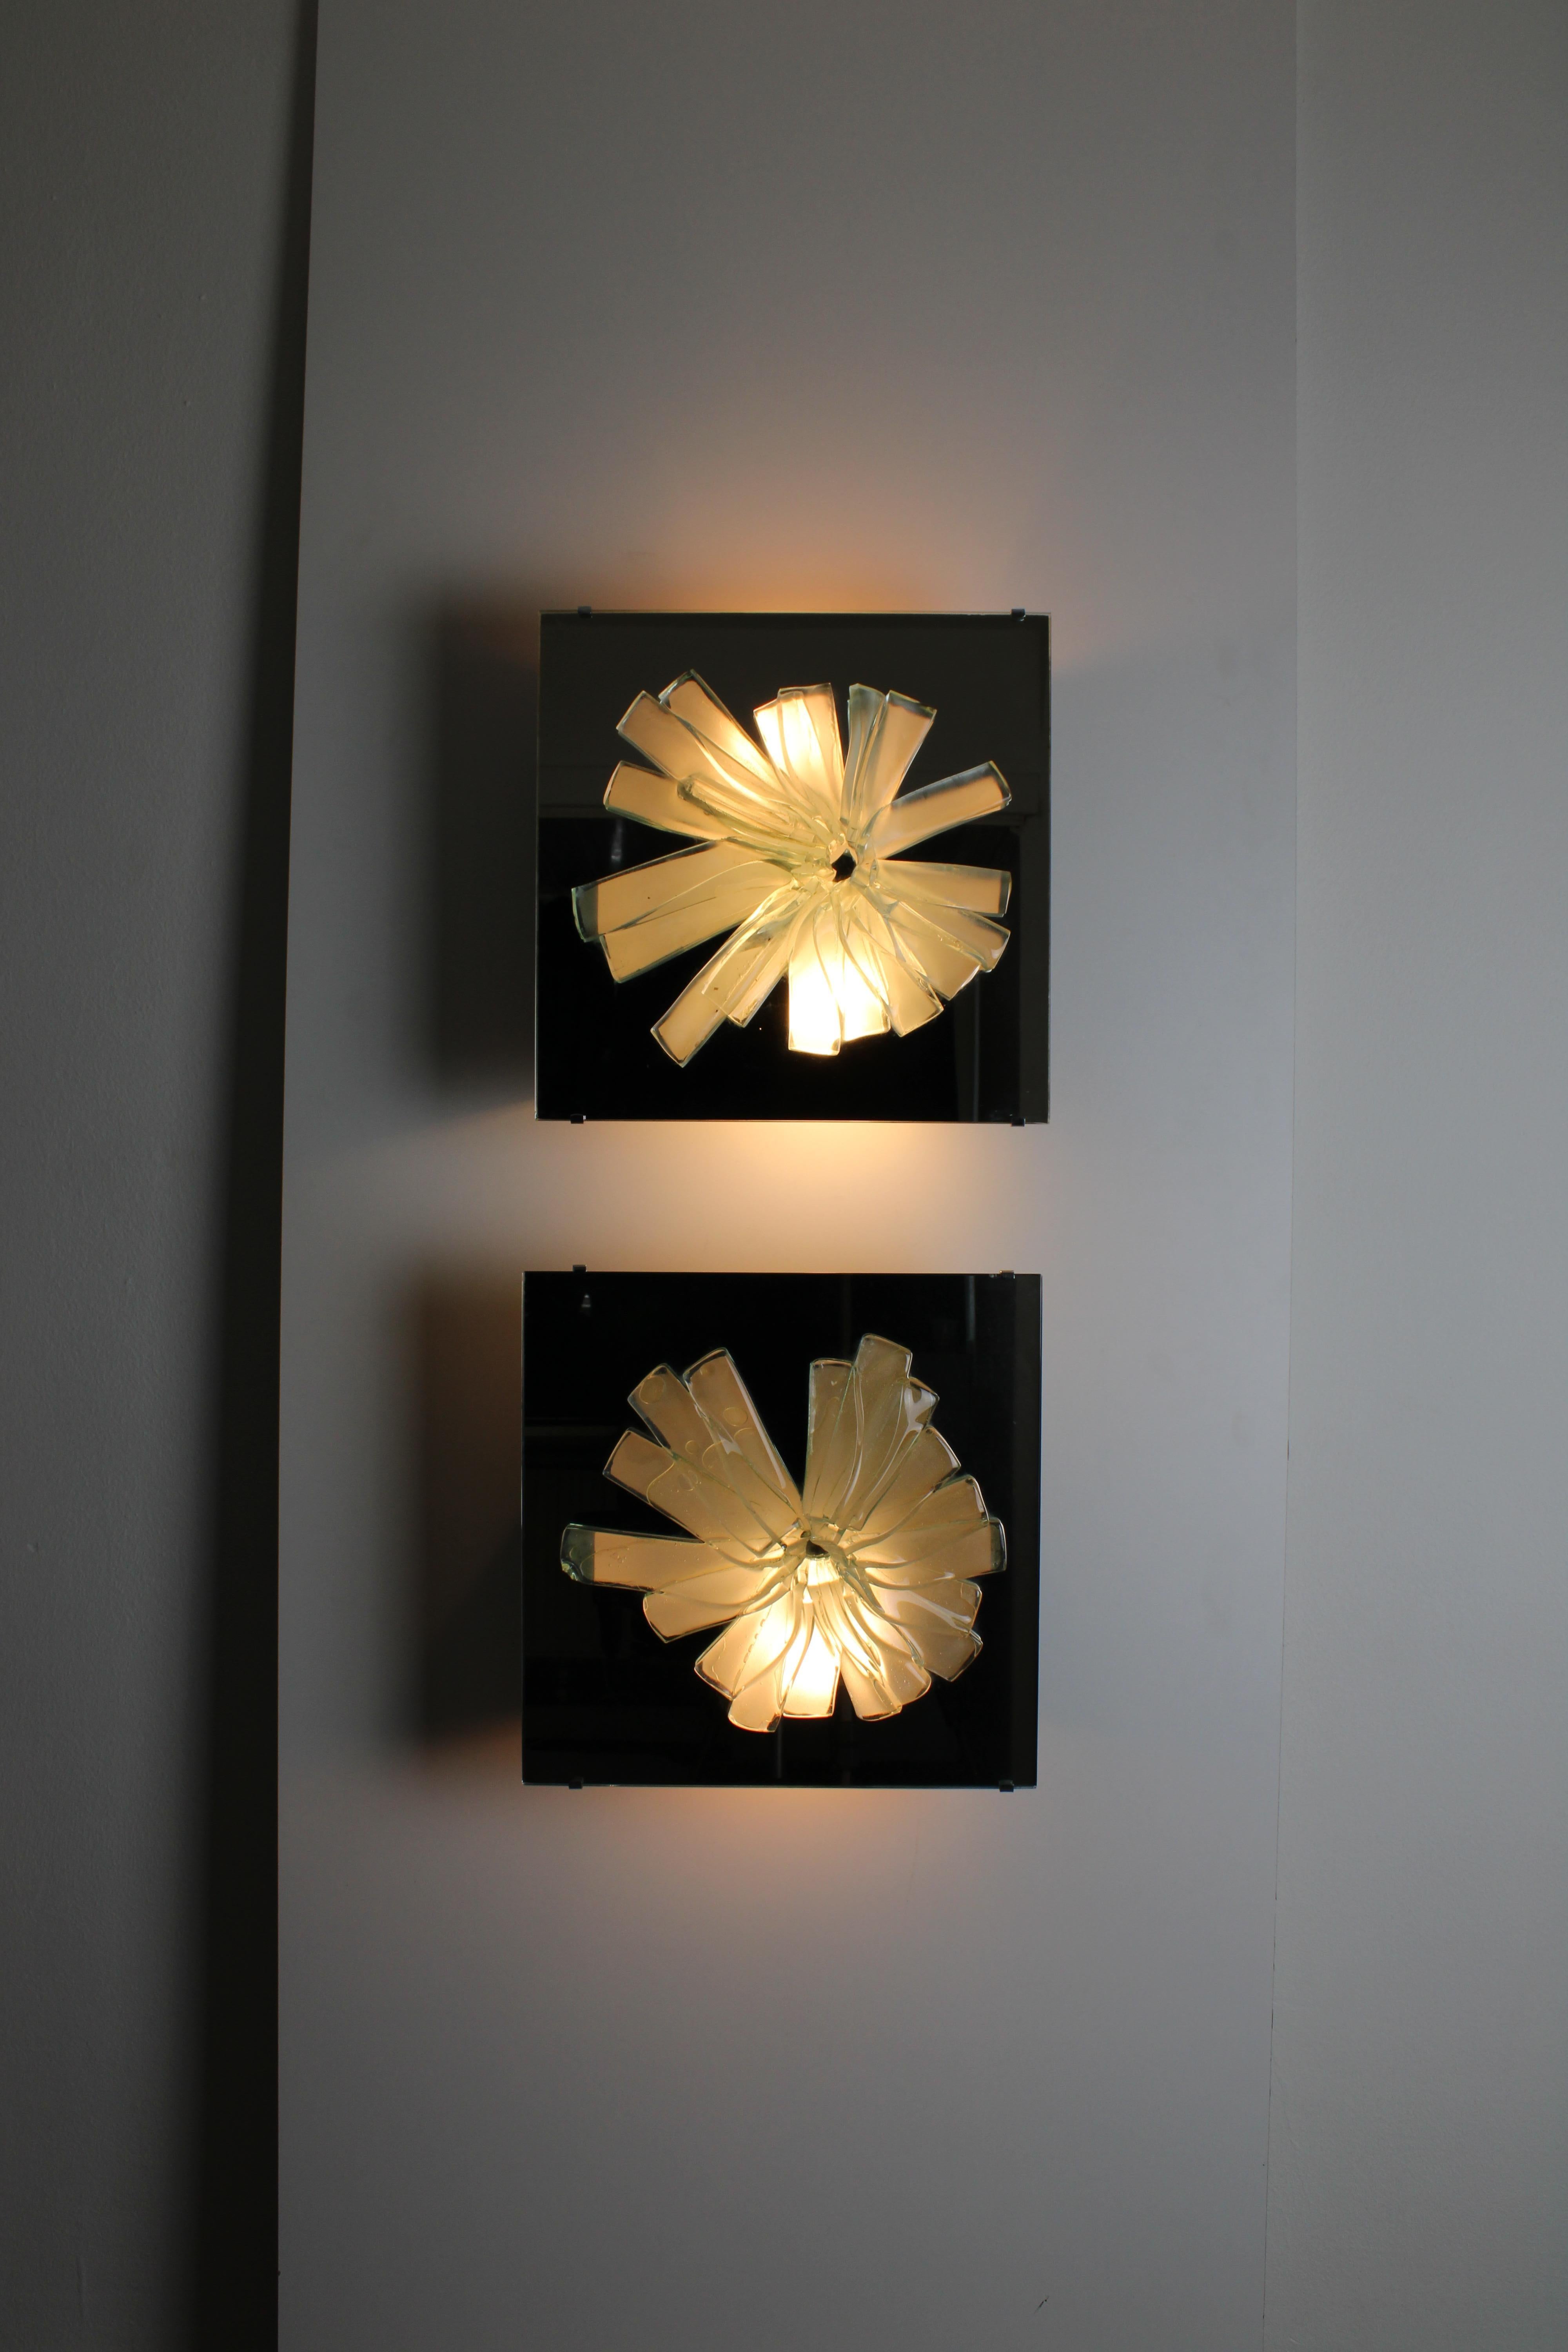 Set of 2 very rare Lichreliëf wall lamps by RAAK Amsterdam. The glass shards are handmade and melted together.
Behind the glass are 2 sockets that shine through the multiple fractured glass relief. The glass light fracture is surrounded by mirrored